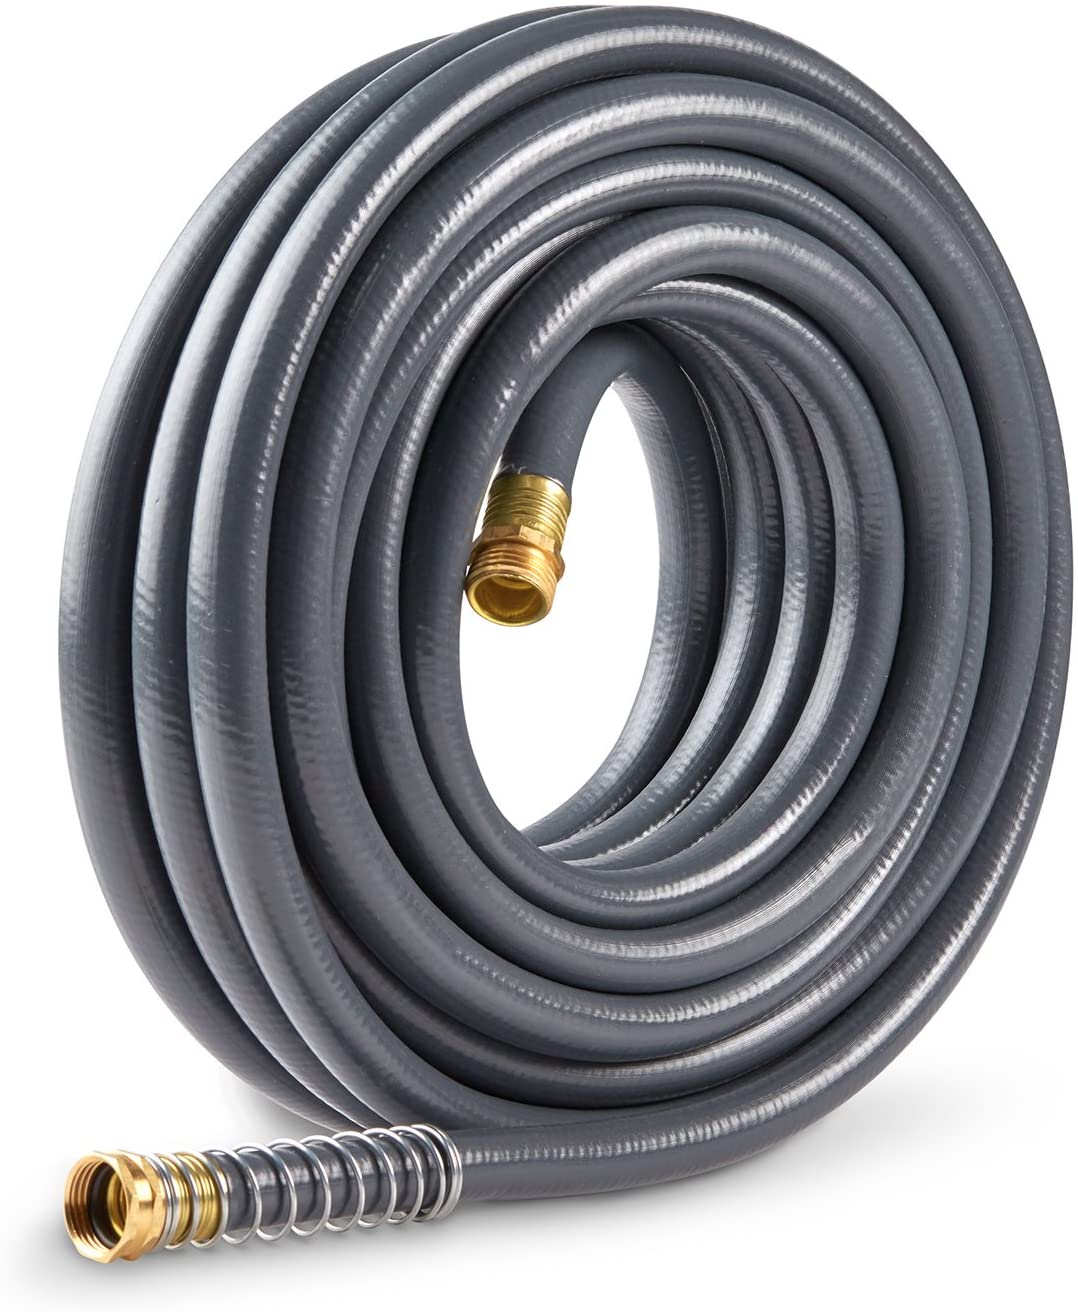 Gilmour 8-ply Flexogen Hose 5/8-Inch by 75-Foot, Gray